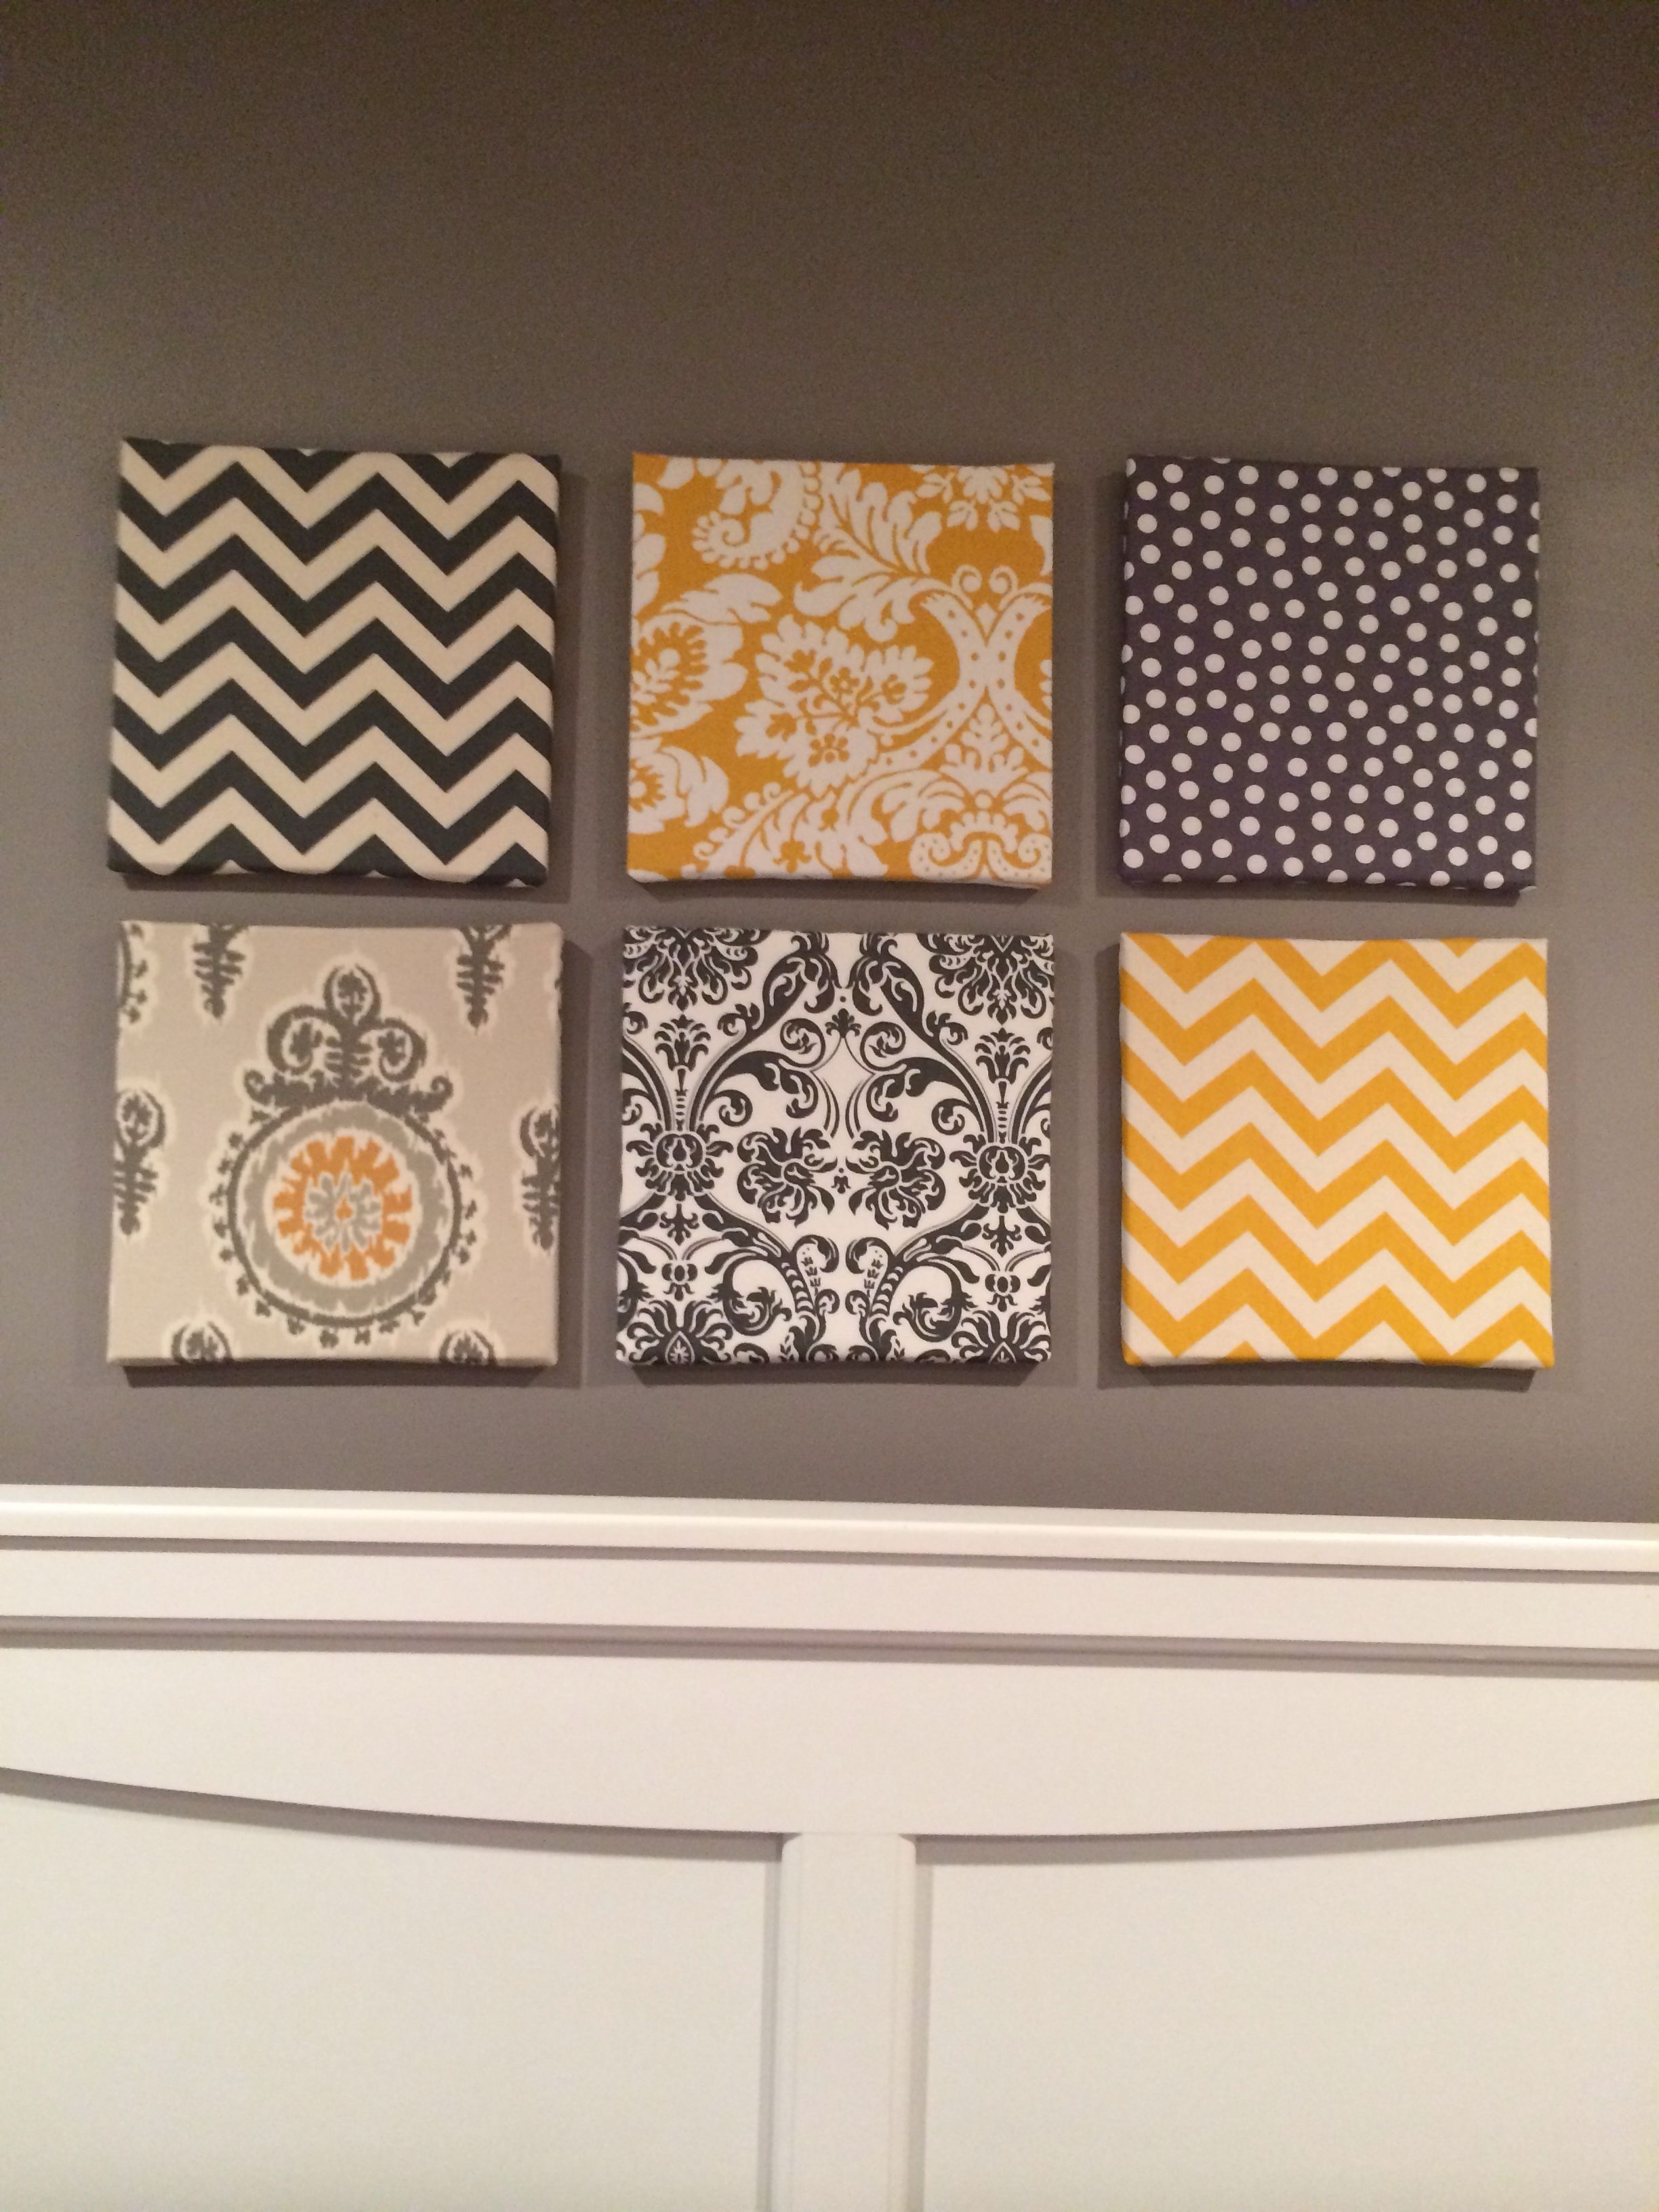 My Fabric Over Canvas Wall Art For My Gray And Yellow Themed Room In Most Current Fabric Wrapped Styrofoam Wall Art (View 11 of 15)